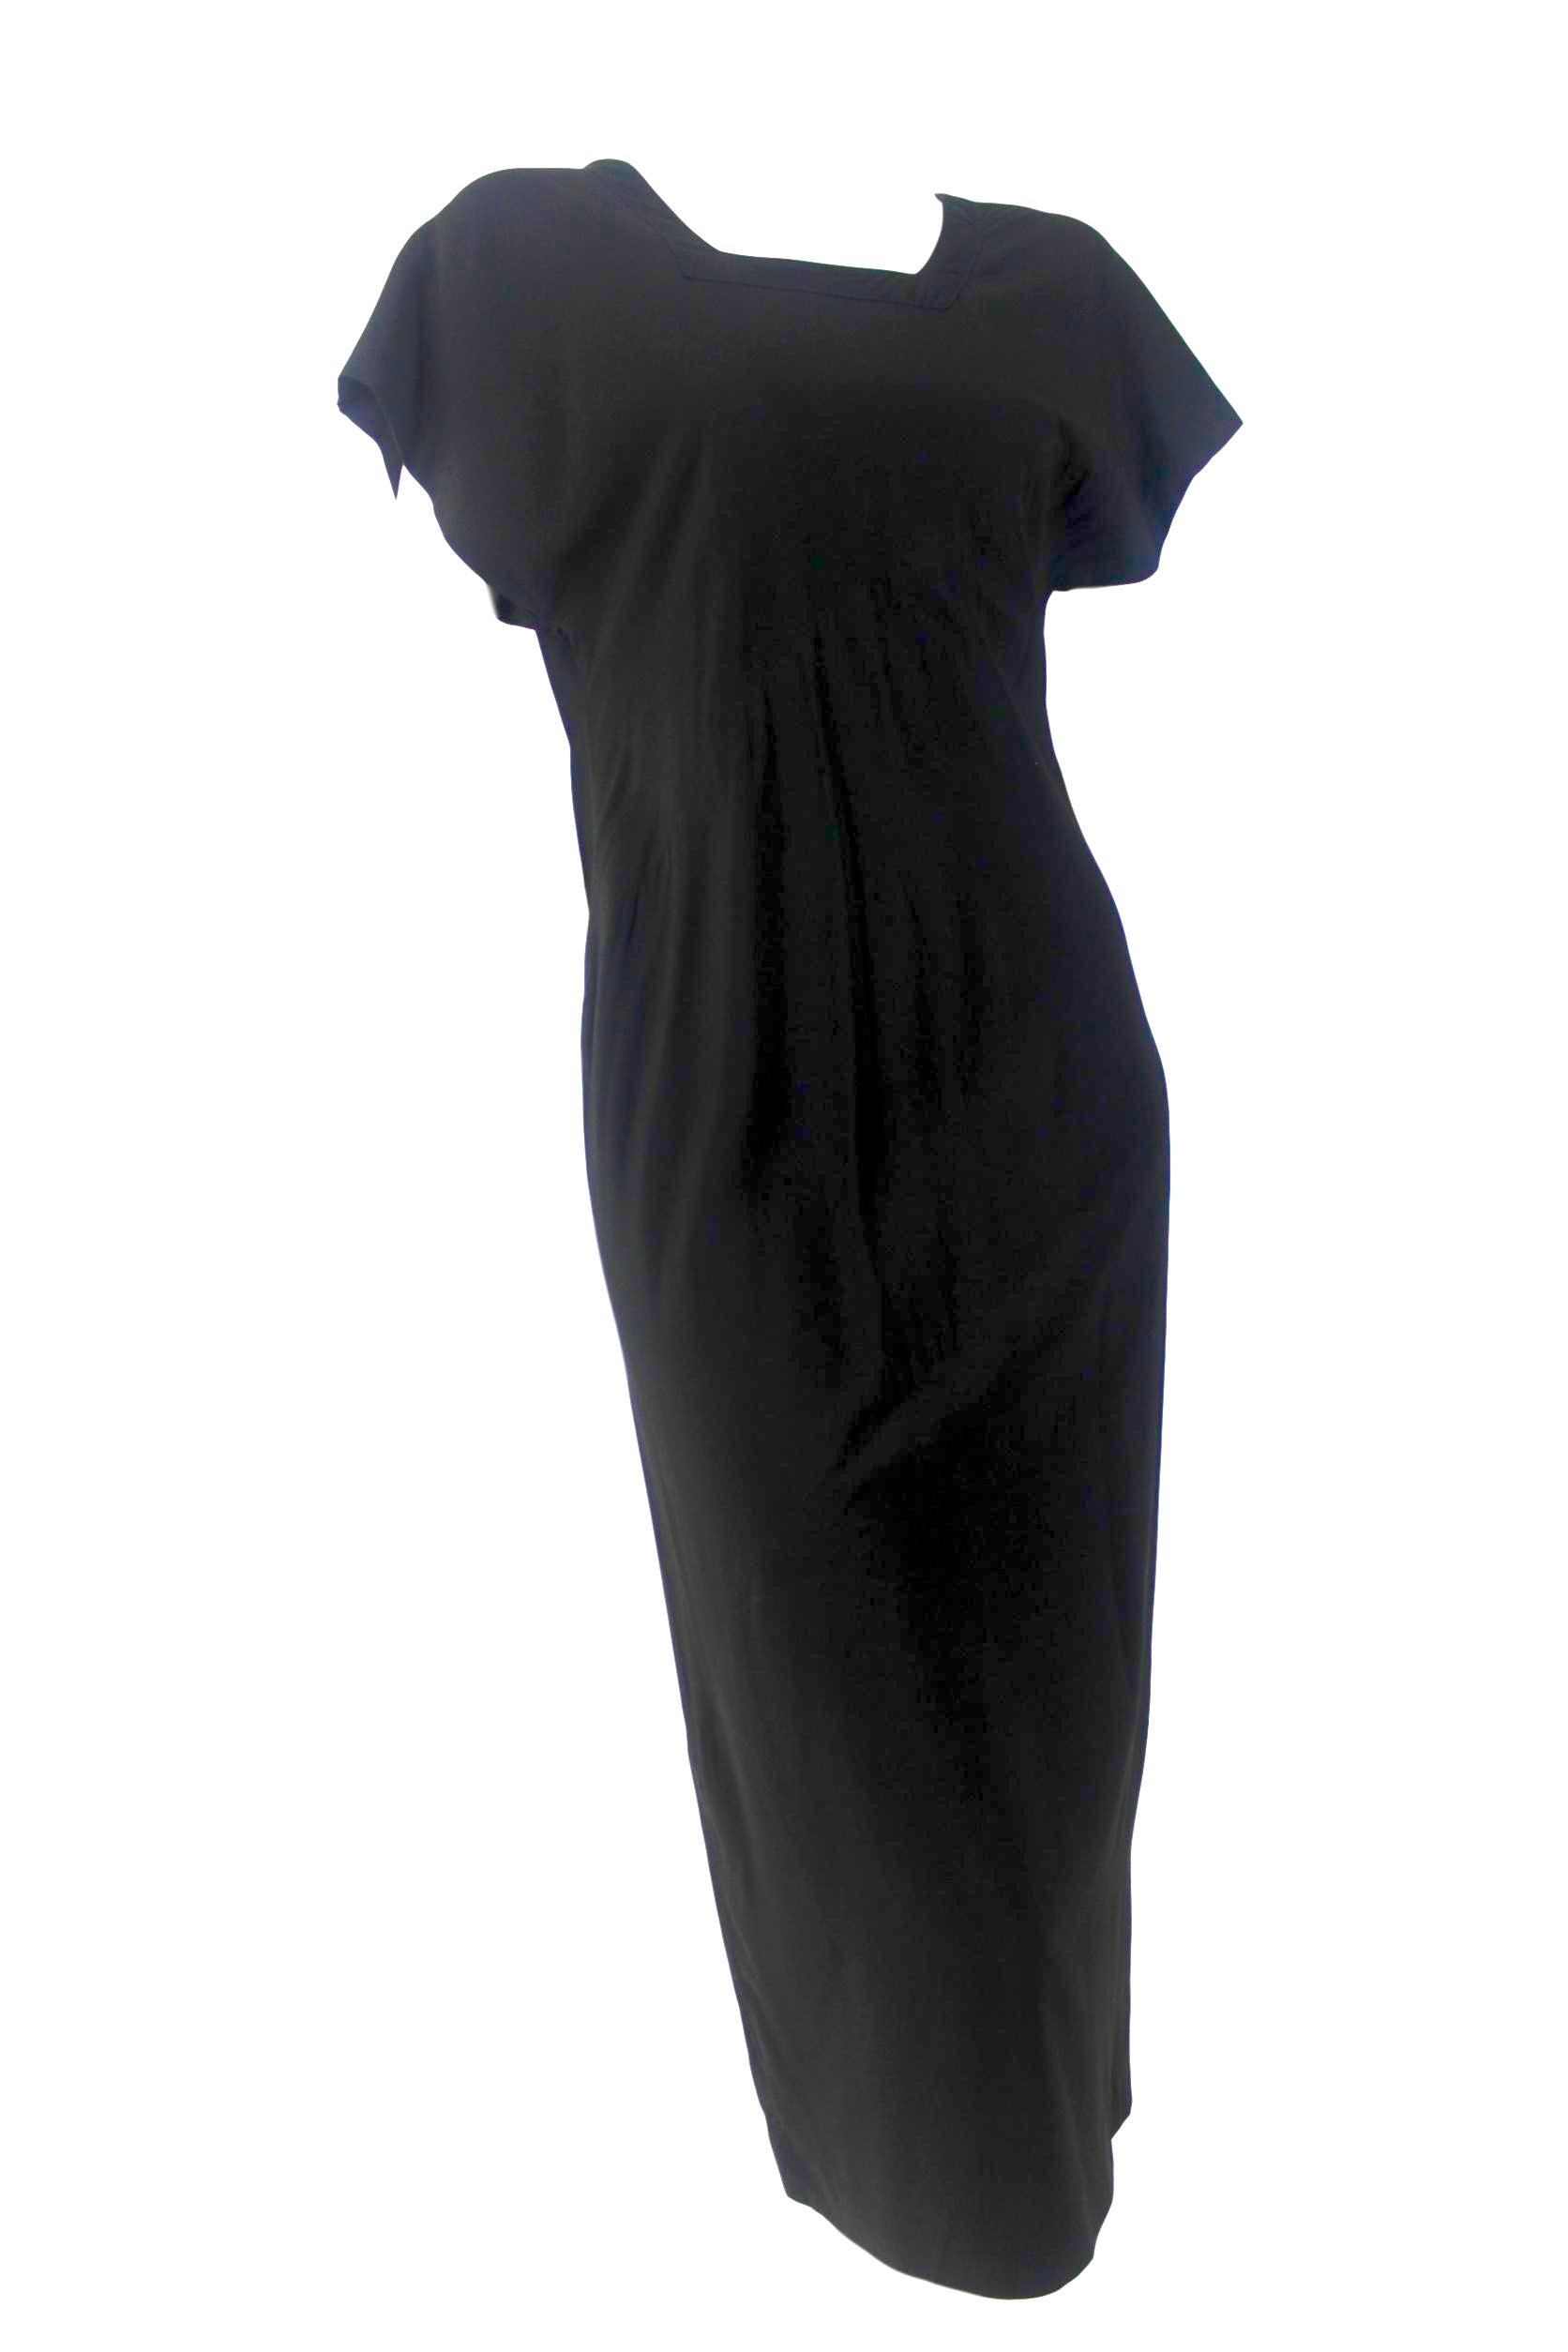 John Galliano
Black Bias Cut Silk Dress
Early Made in England Label
Labelled size US 8 - UK 10